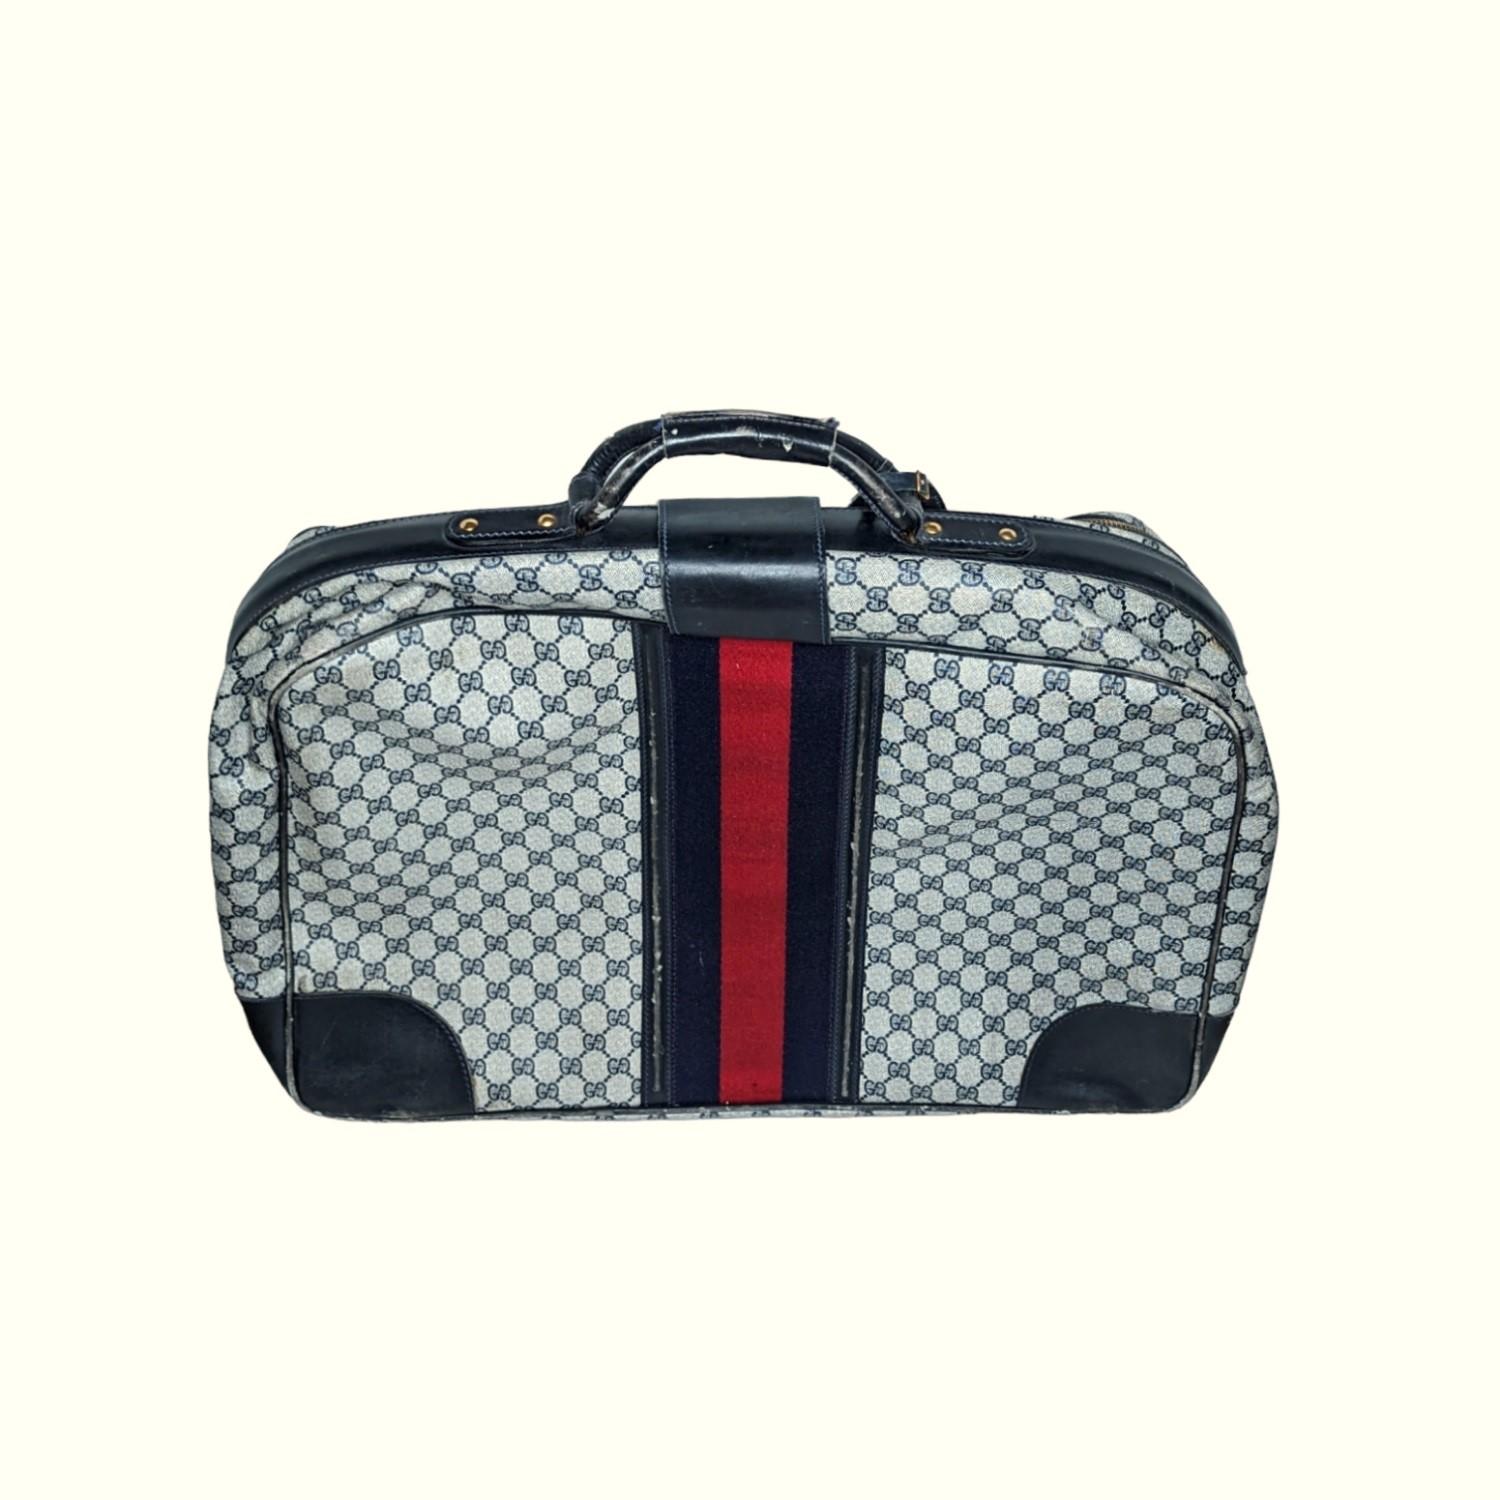 Vintage blue 'GG' monogram coated canvas suitcase from Gucci Circa late 1970’s - early 1980’s. Navy leather trim. Gold-tone hardware details. Navy and red striped textile down the front and back. Two wraparound zippers for closure. Two handles with